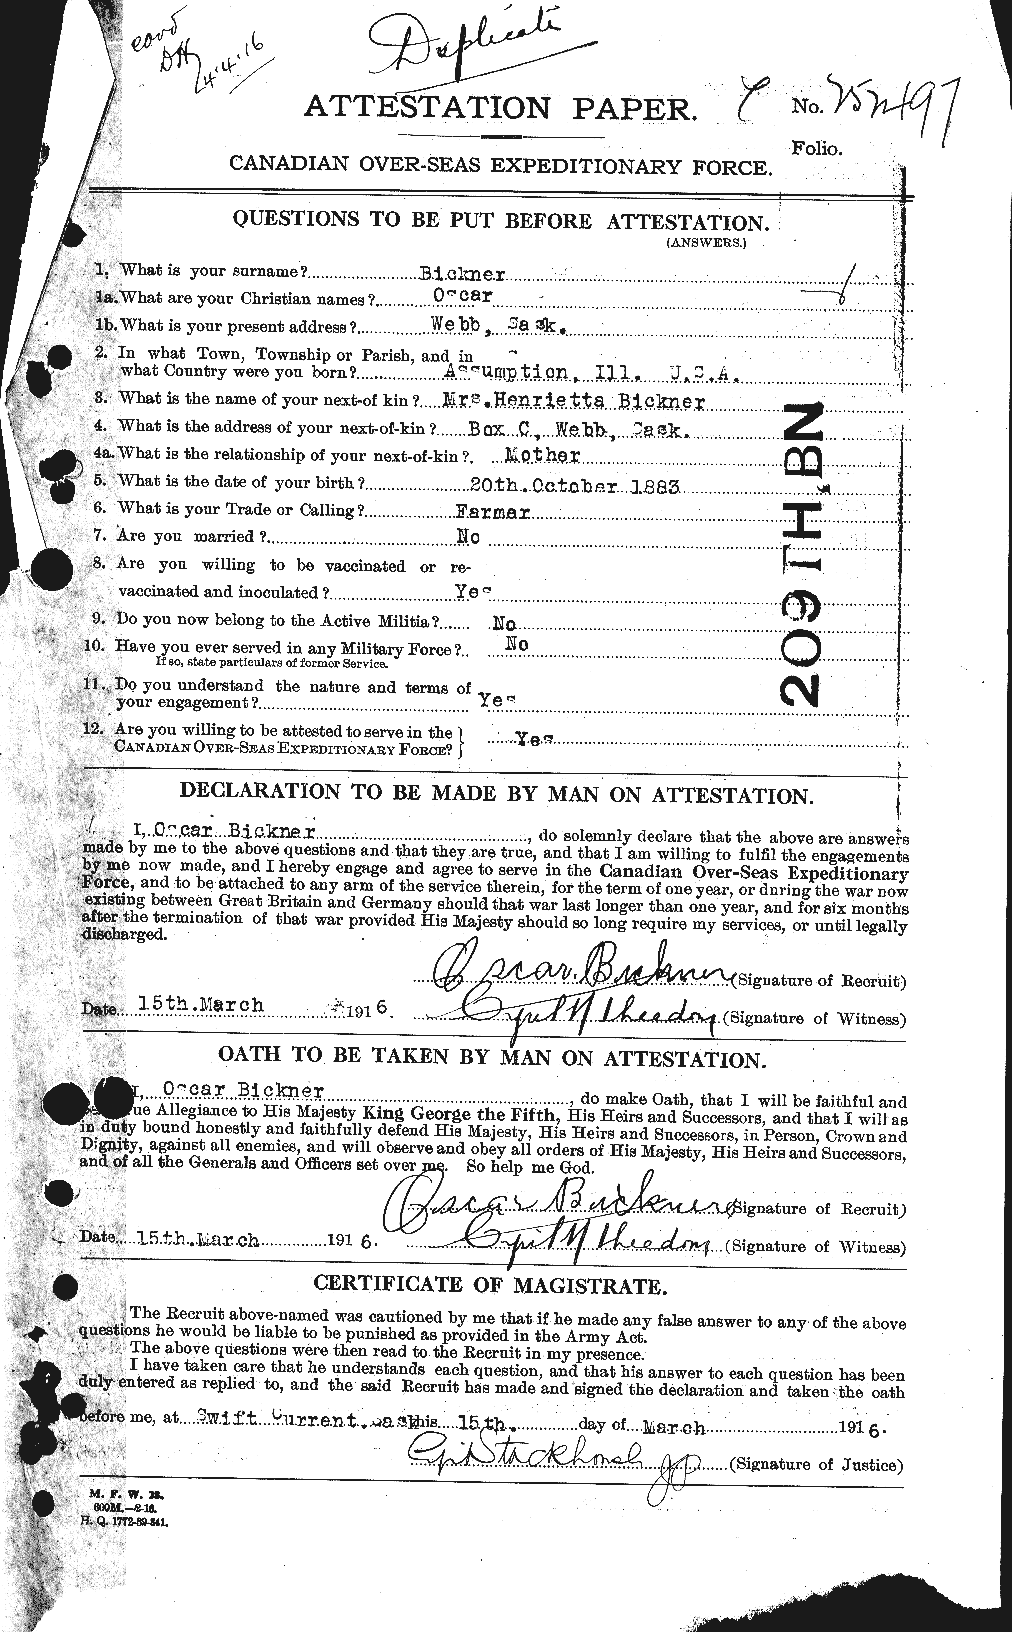 Personnel Records of the First World War - CEF 244858a